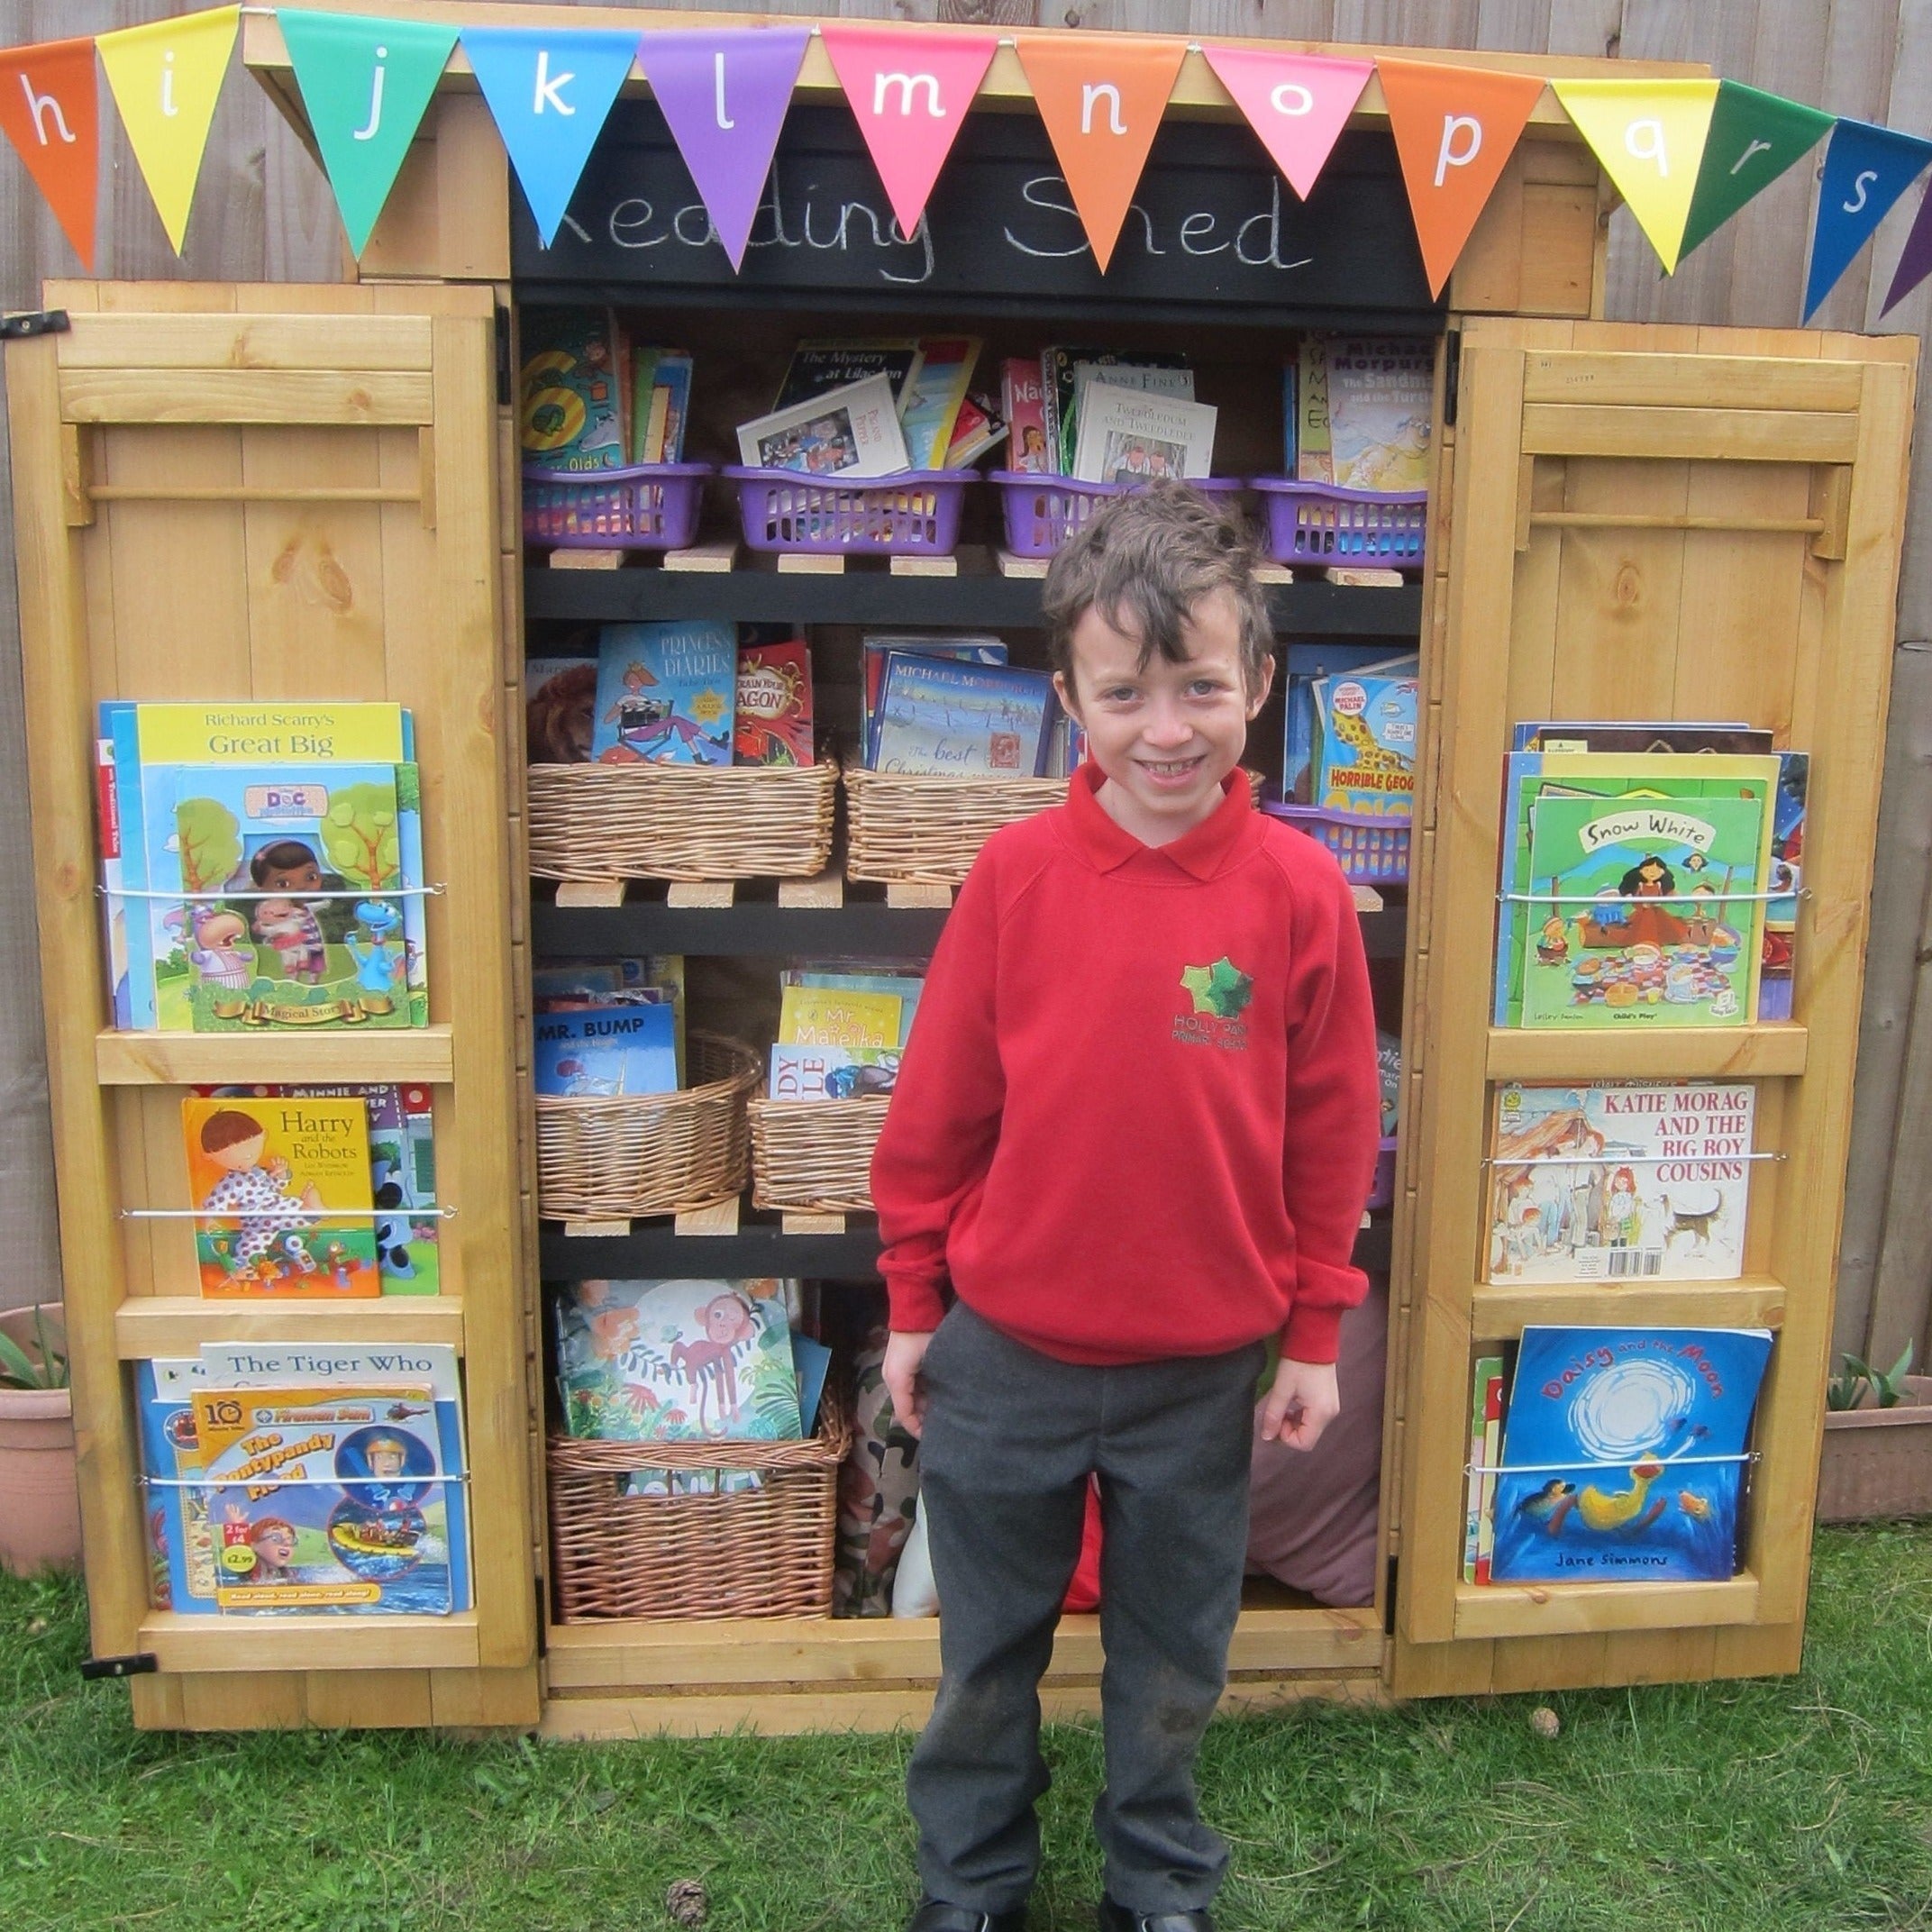 Reading Shed, This Reading Shed will store a wide range of resources to create an exciting and engaging outdoor learning environment. This Reading Shed can be configured with shelves spaced for books or baskets of books, storage space for cushions and beanbags and the capacity to store story props and phonics resources.The Reading Shed also allows you to hang bunting and washing lines for sequencing stories as well as blackboard painted doors for storytelling. The Reading Shed can be decorated to the imagin